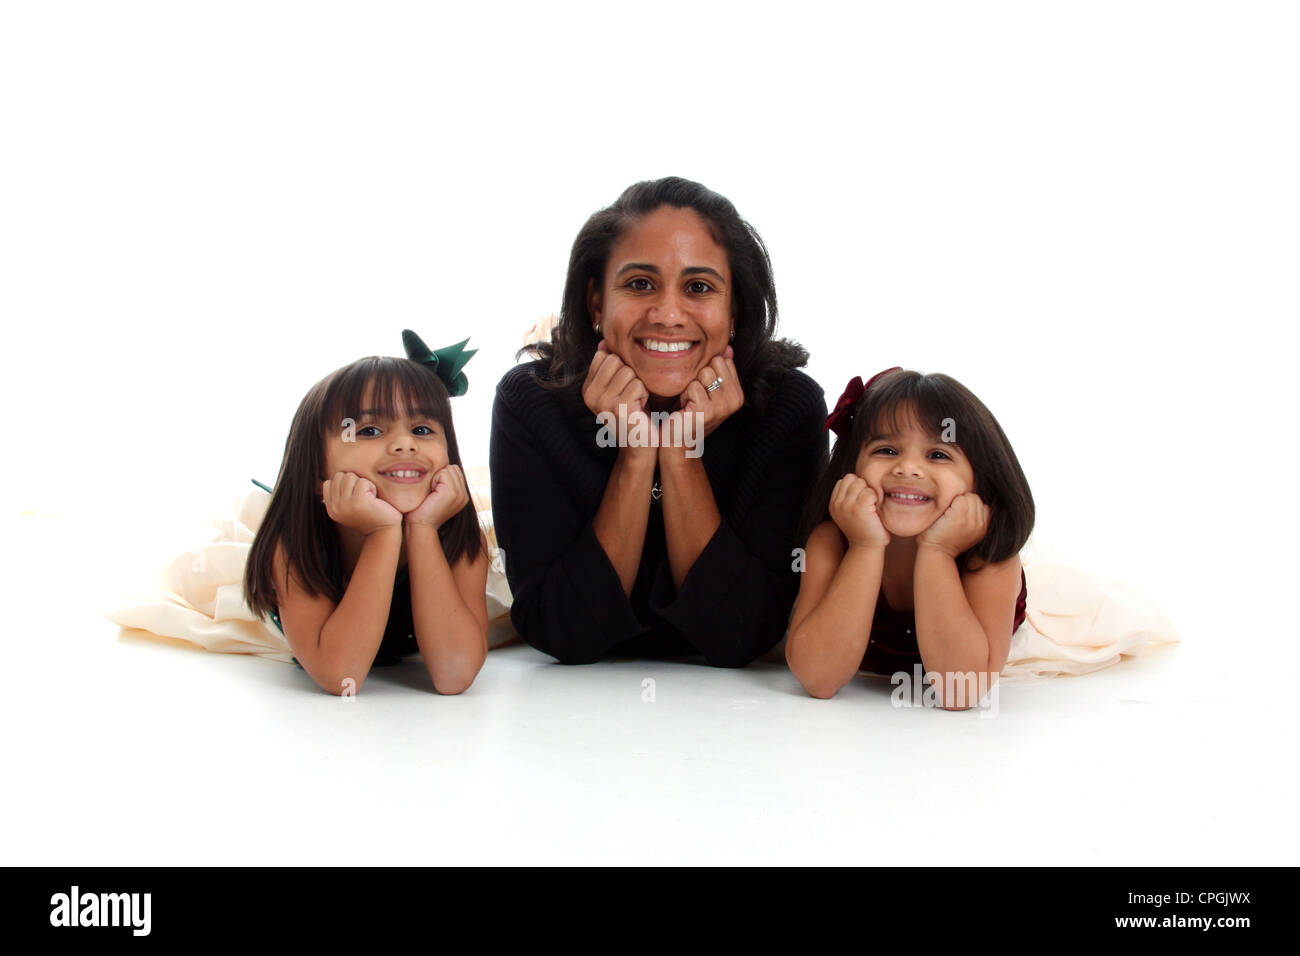 Young mixed race family on a white background Stock Photo